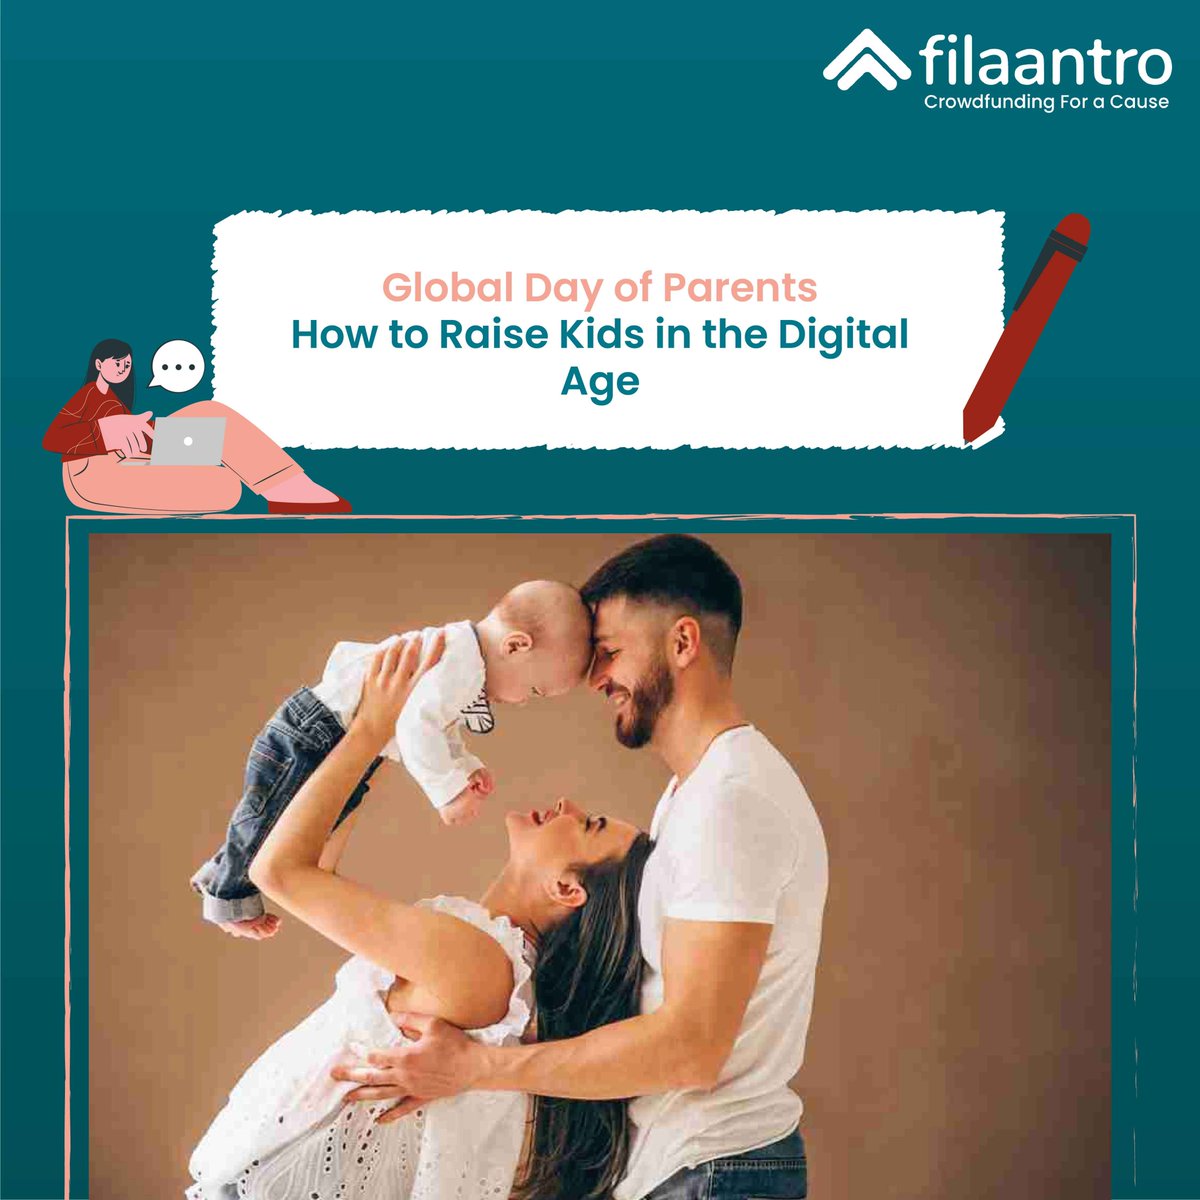 🌍Global Day of Parents: How to Raise Kids in the Digital Age.
.
.
Click here to read the full blog 👉 filaantro.org/blog/global-da…
.
.
#filaantro #globaldayofparents #handsofhope